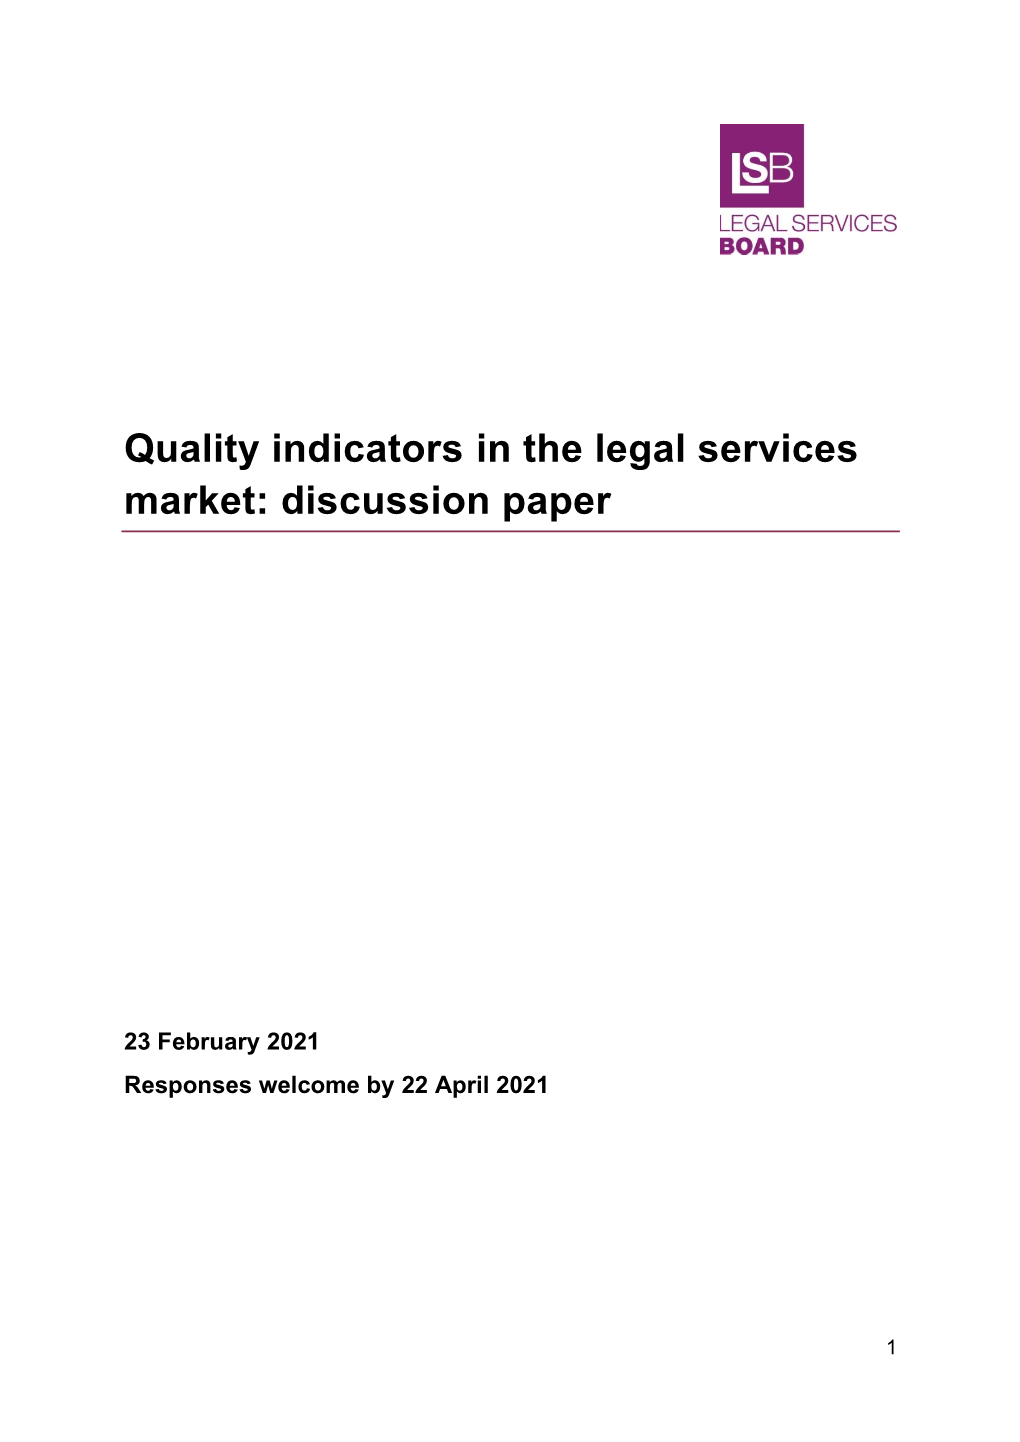 Quality Indicators in the Legal Services Market: Discussion Paper